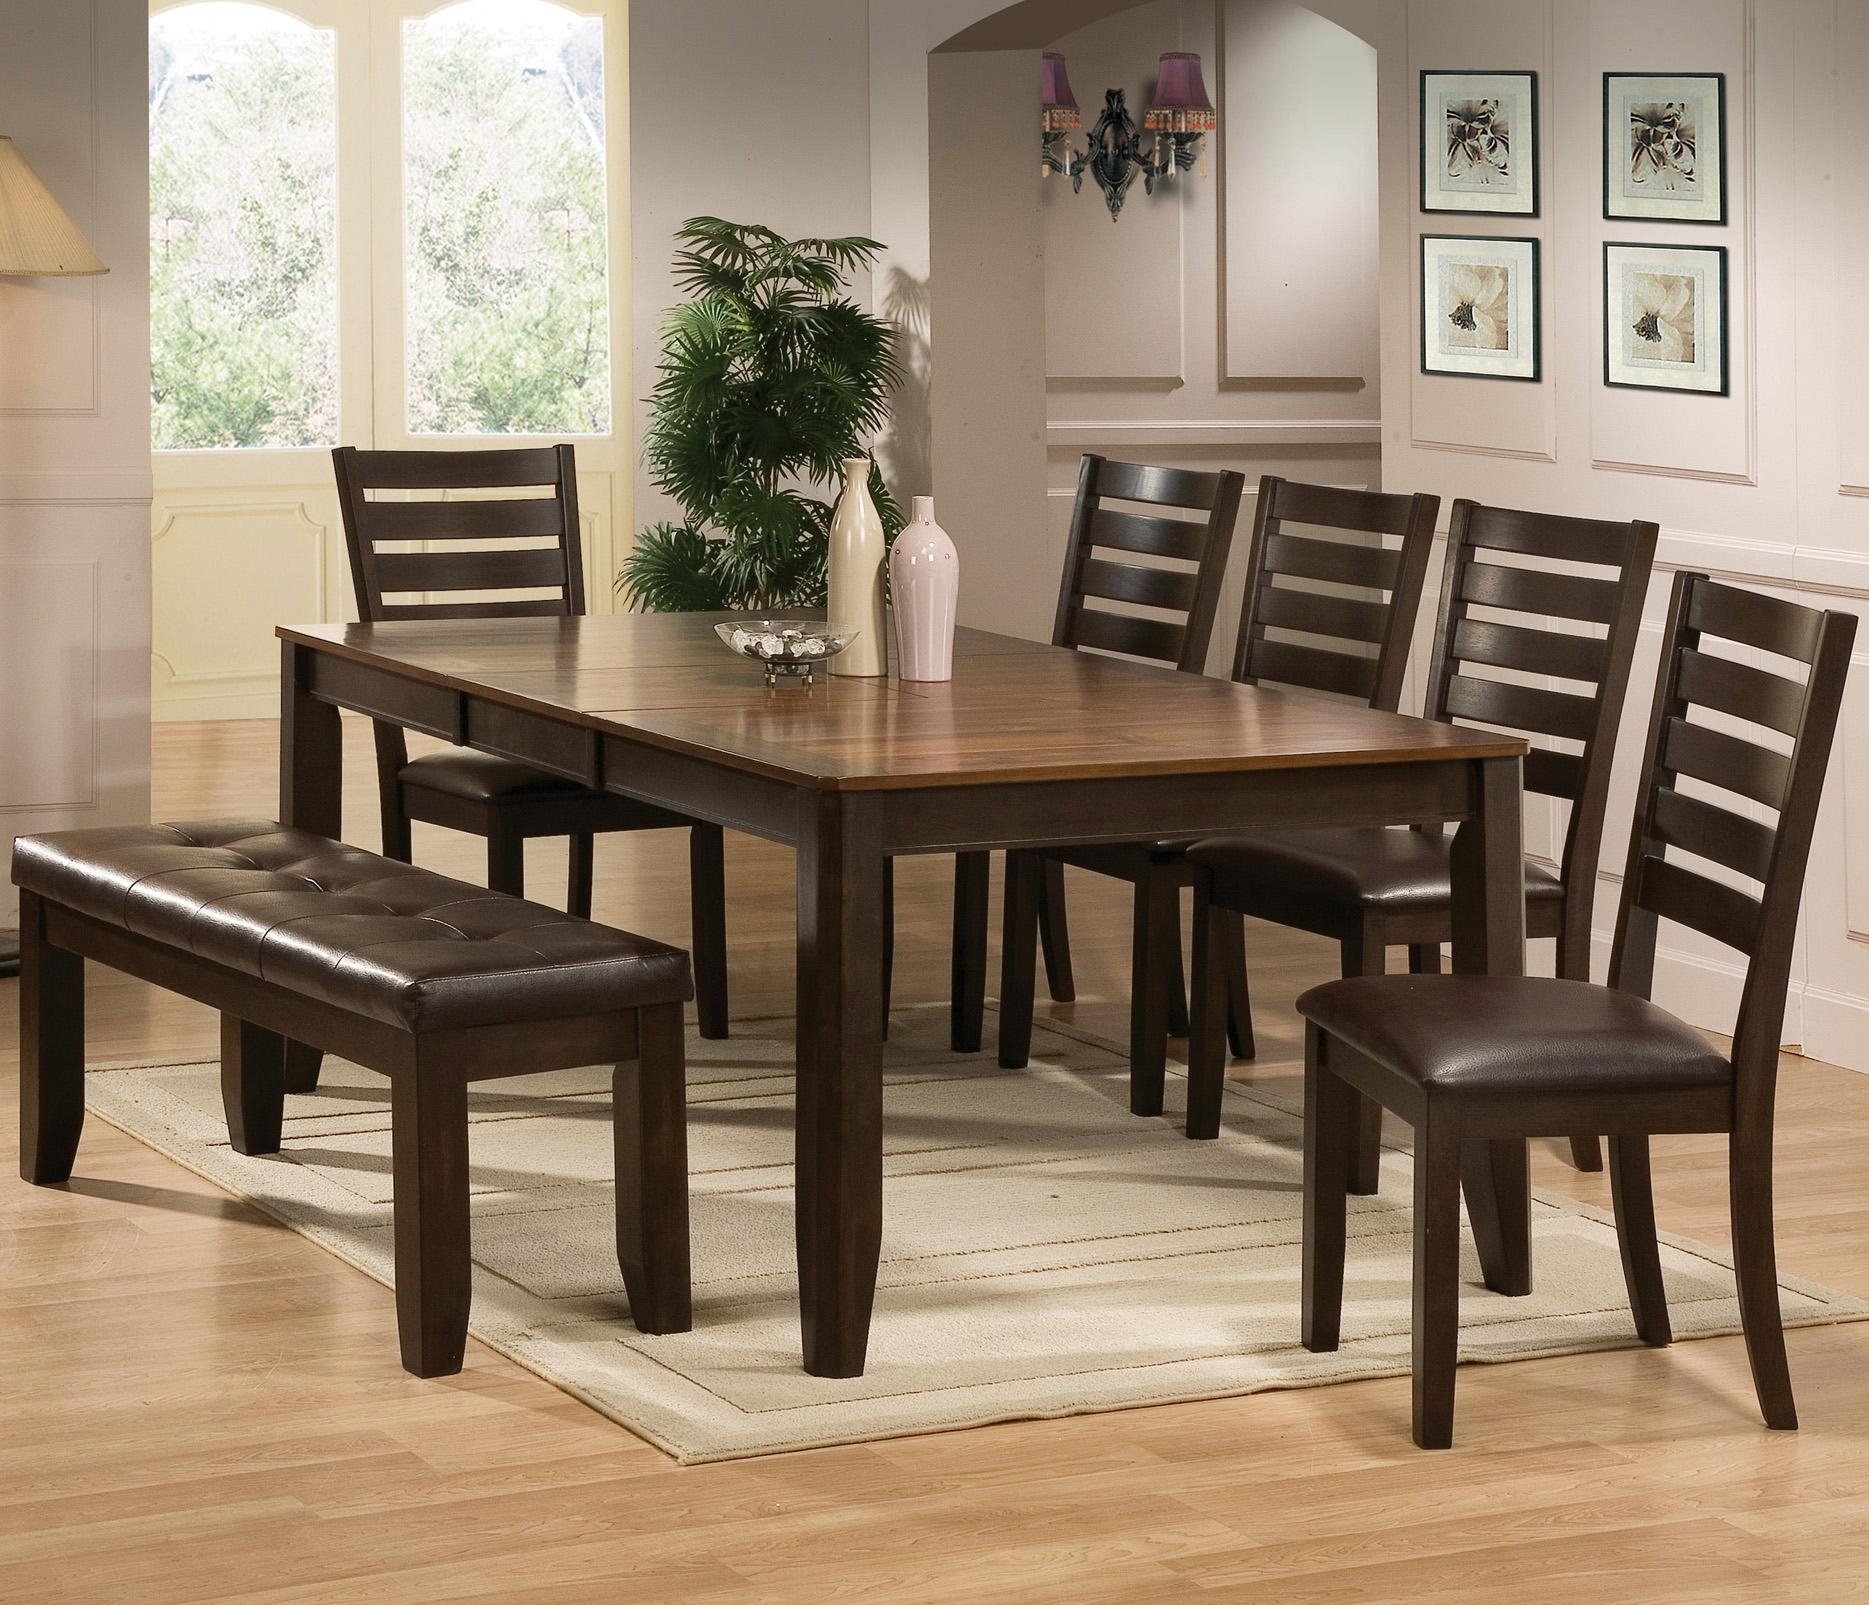 Cheap Dining Room Sets 7 Piece